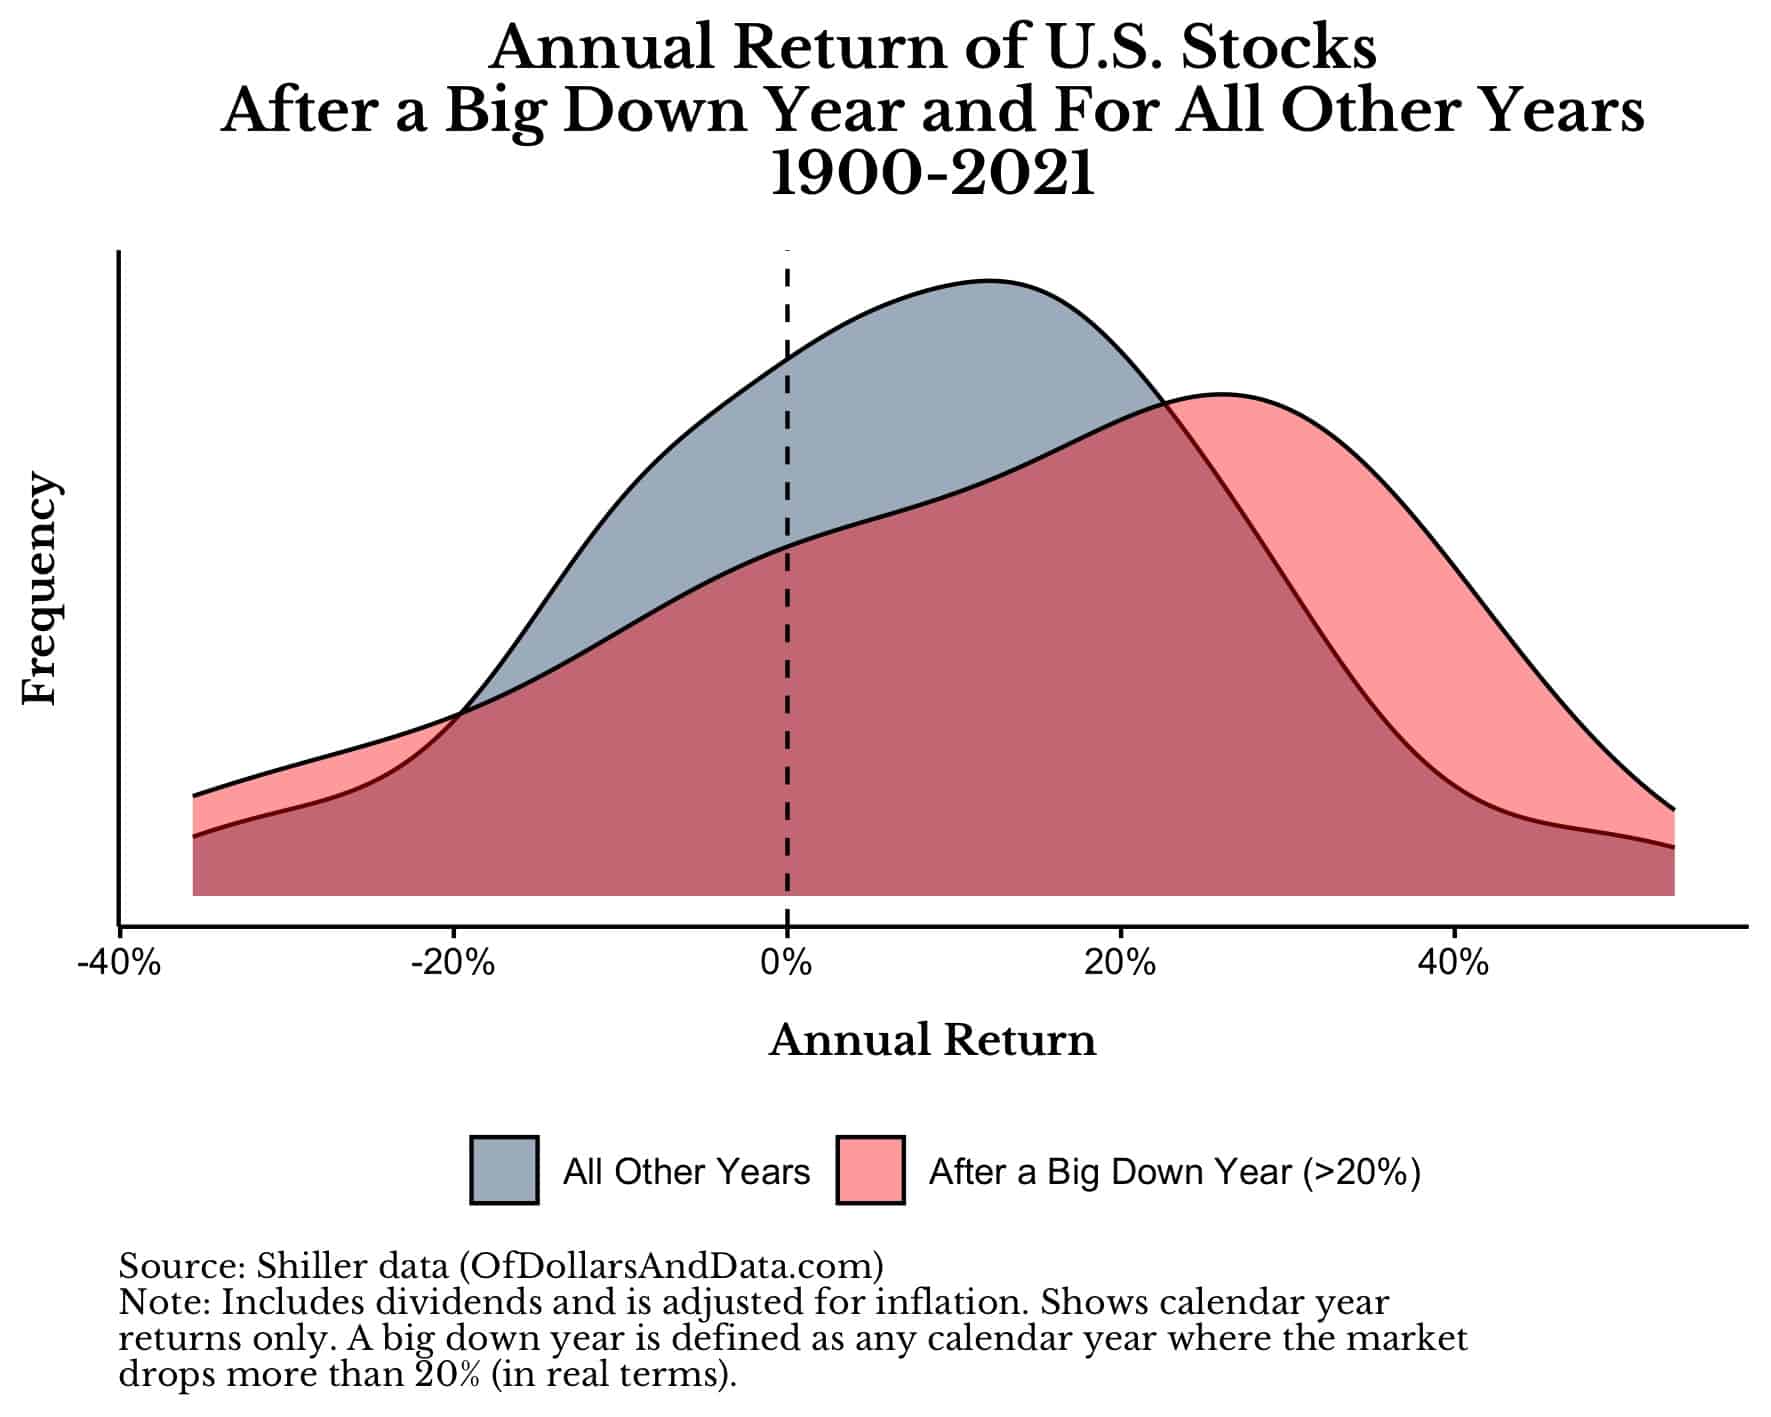 US stock returns after a big down year and in all other years from 1900-2021.